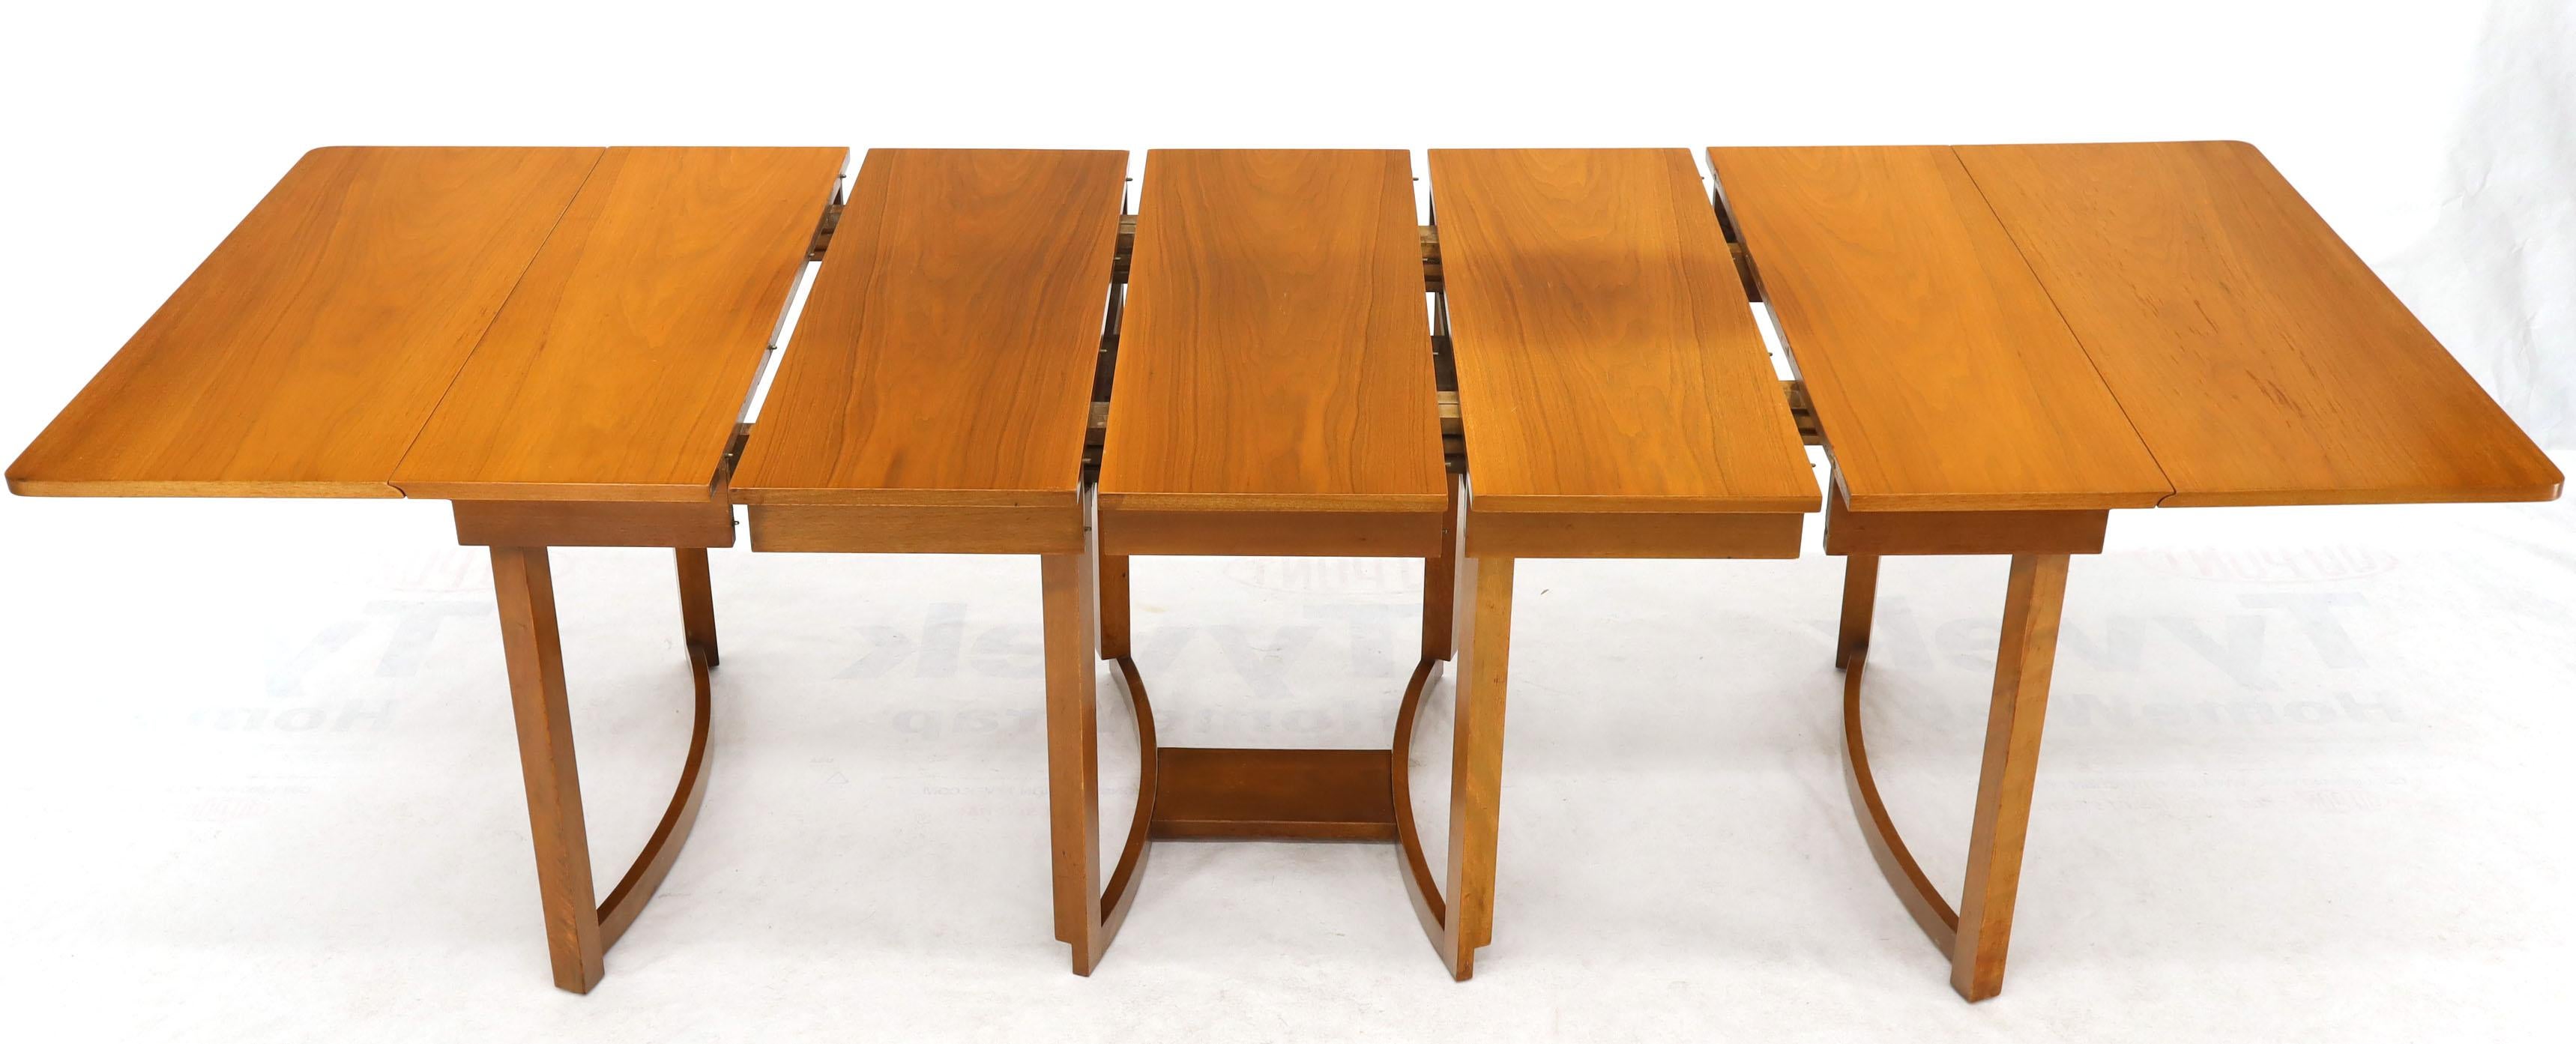 Midcentury Light Walnut Drop Leaf Expandable Dining Table, Three Leafs Boards For Sale 4